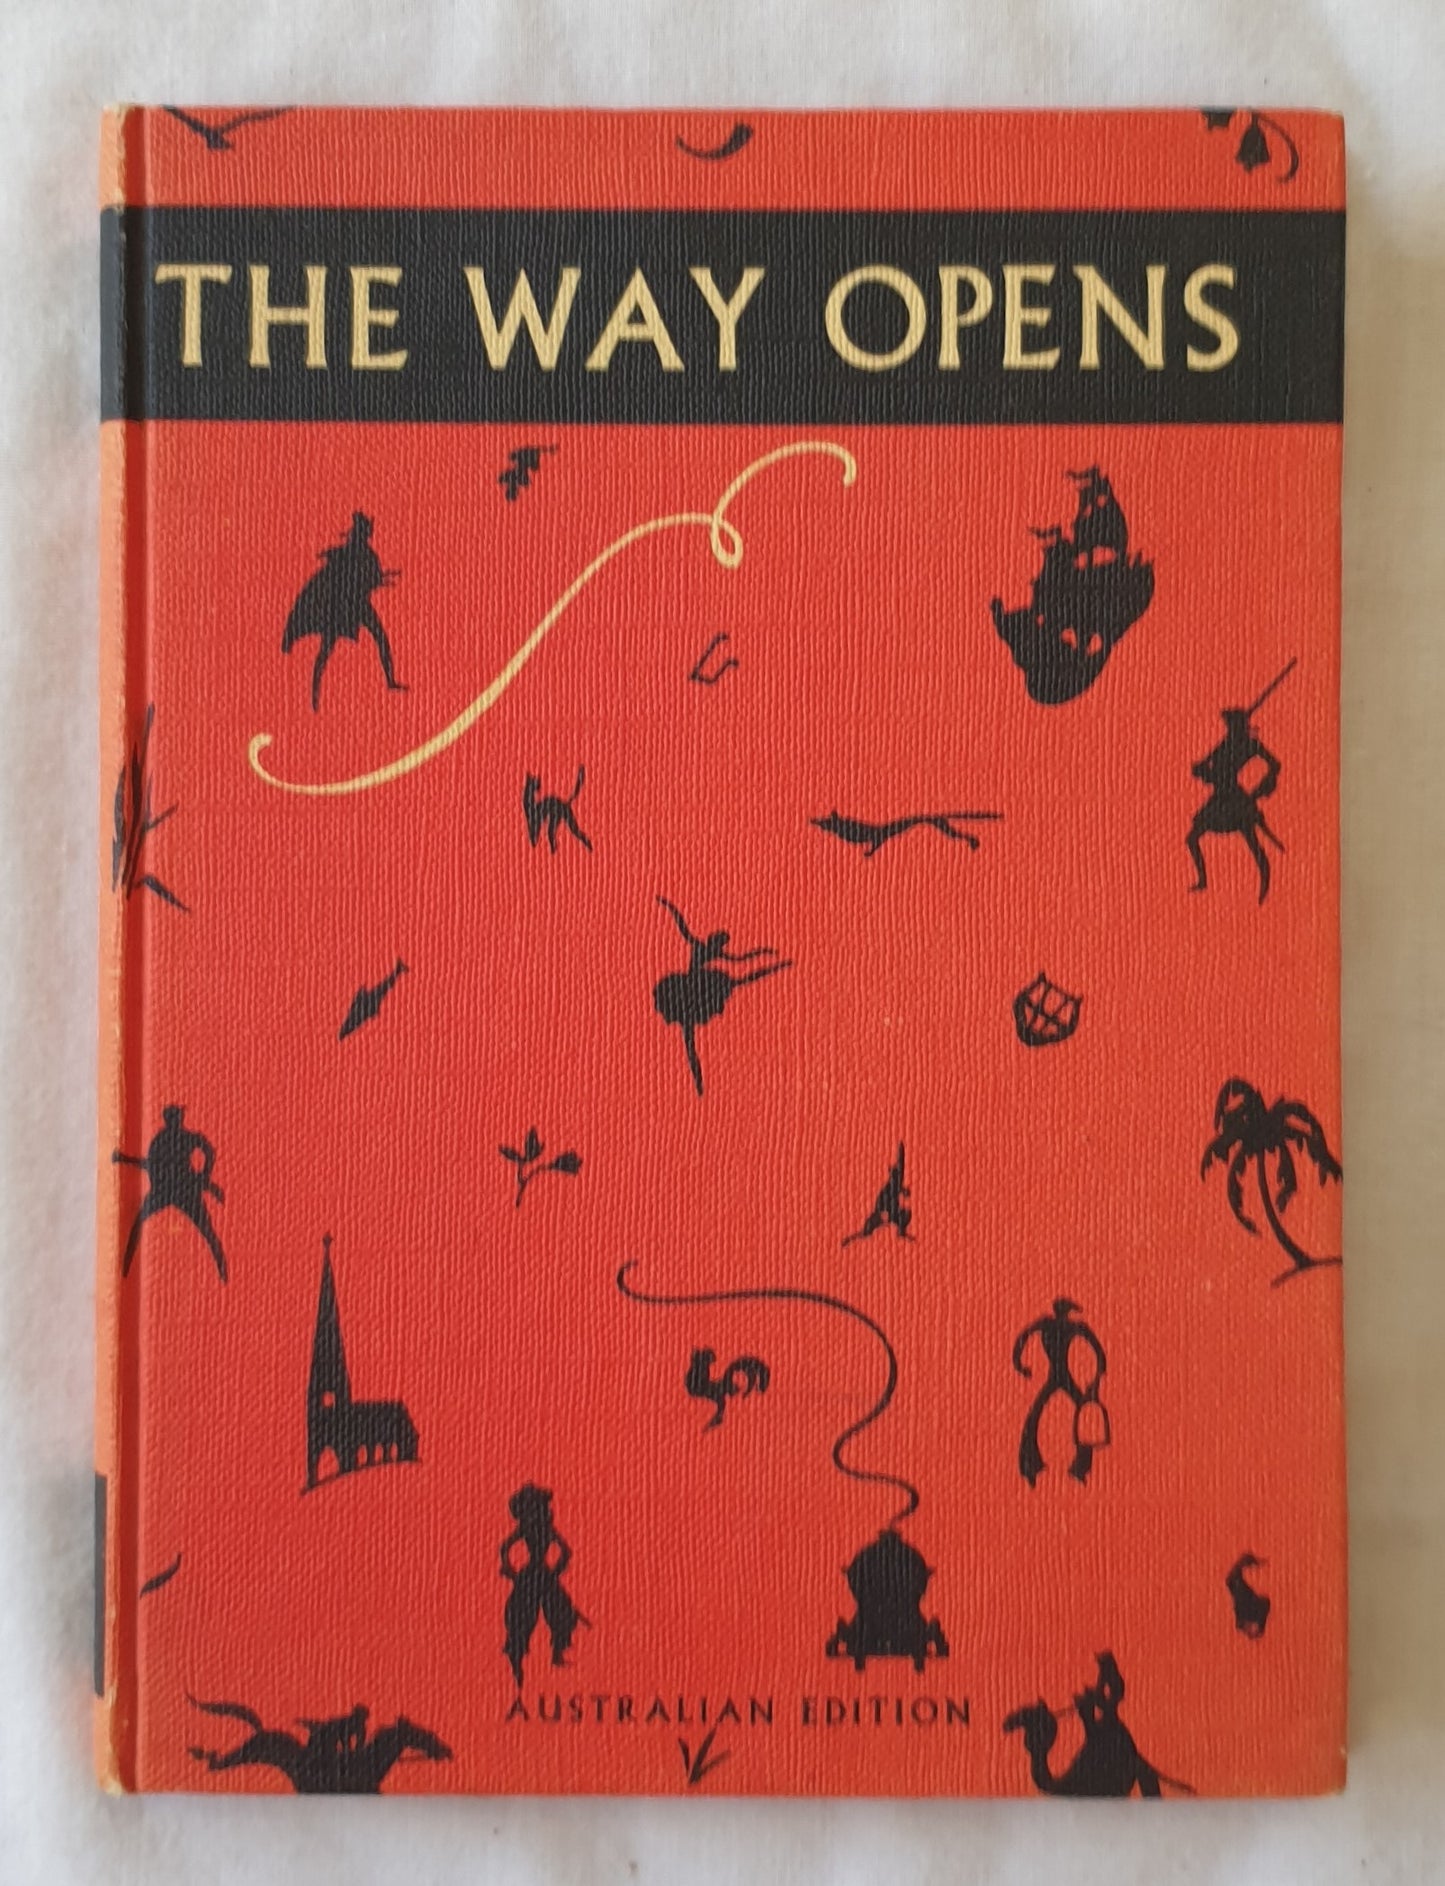 The Way Opens Chosen by E. W. Parker